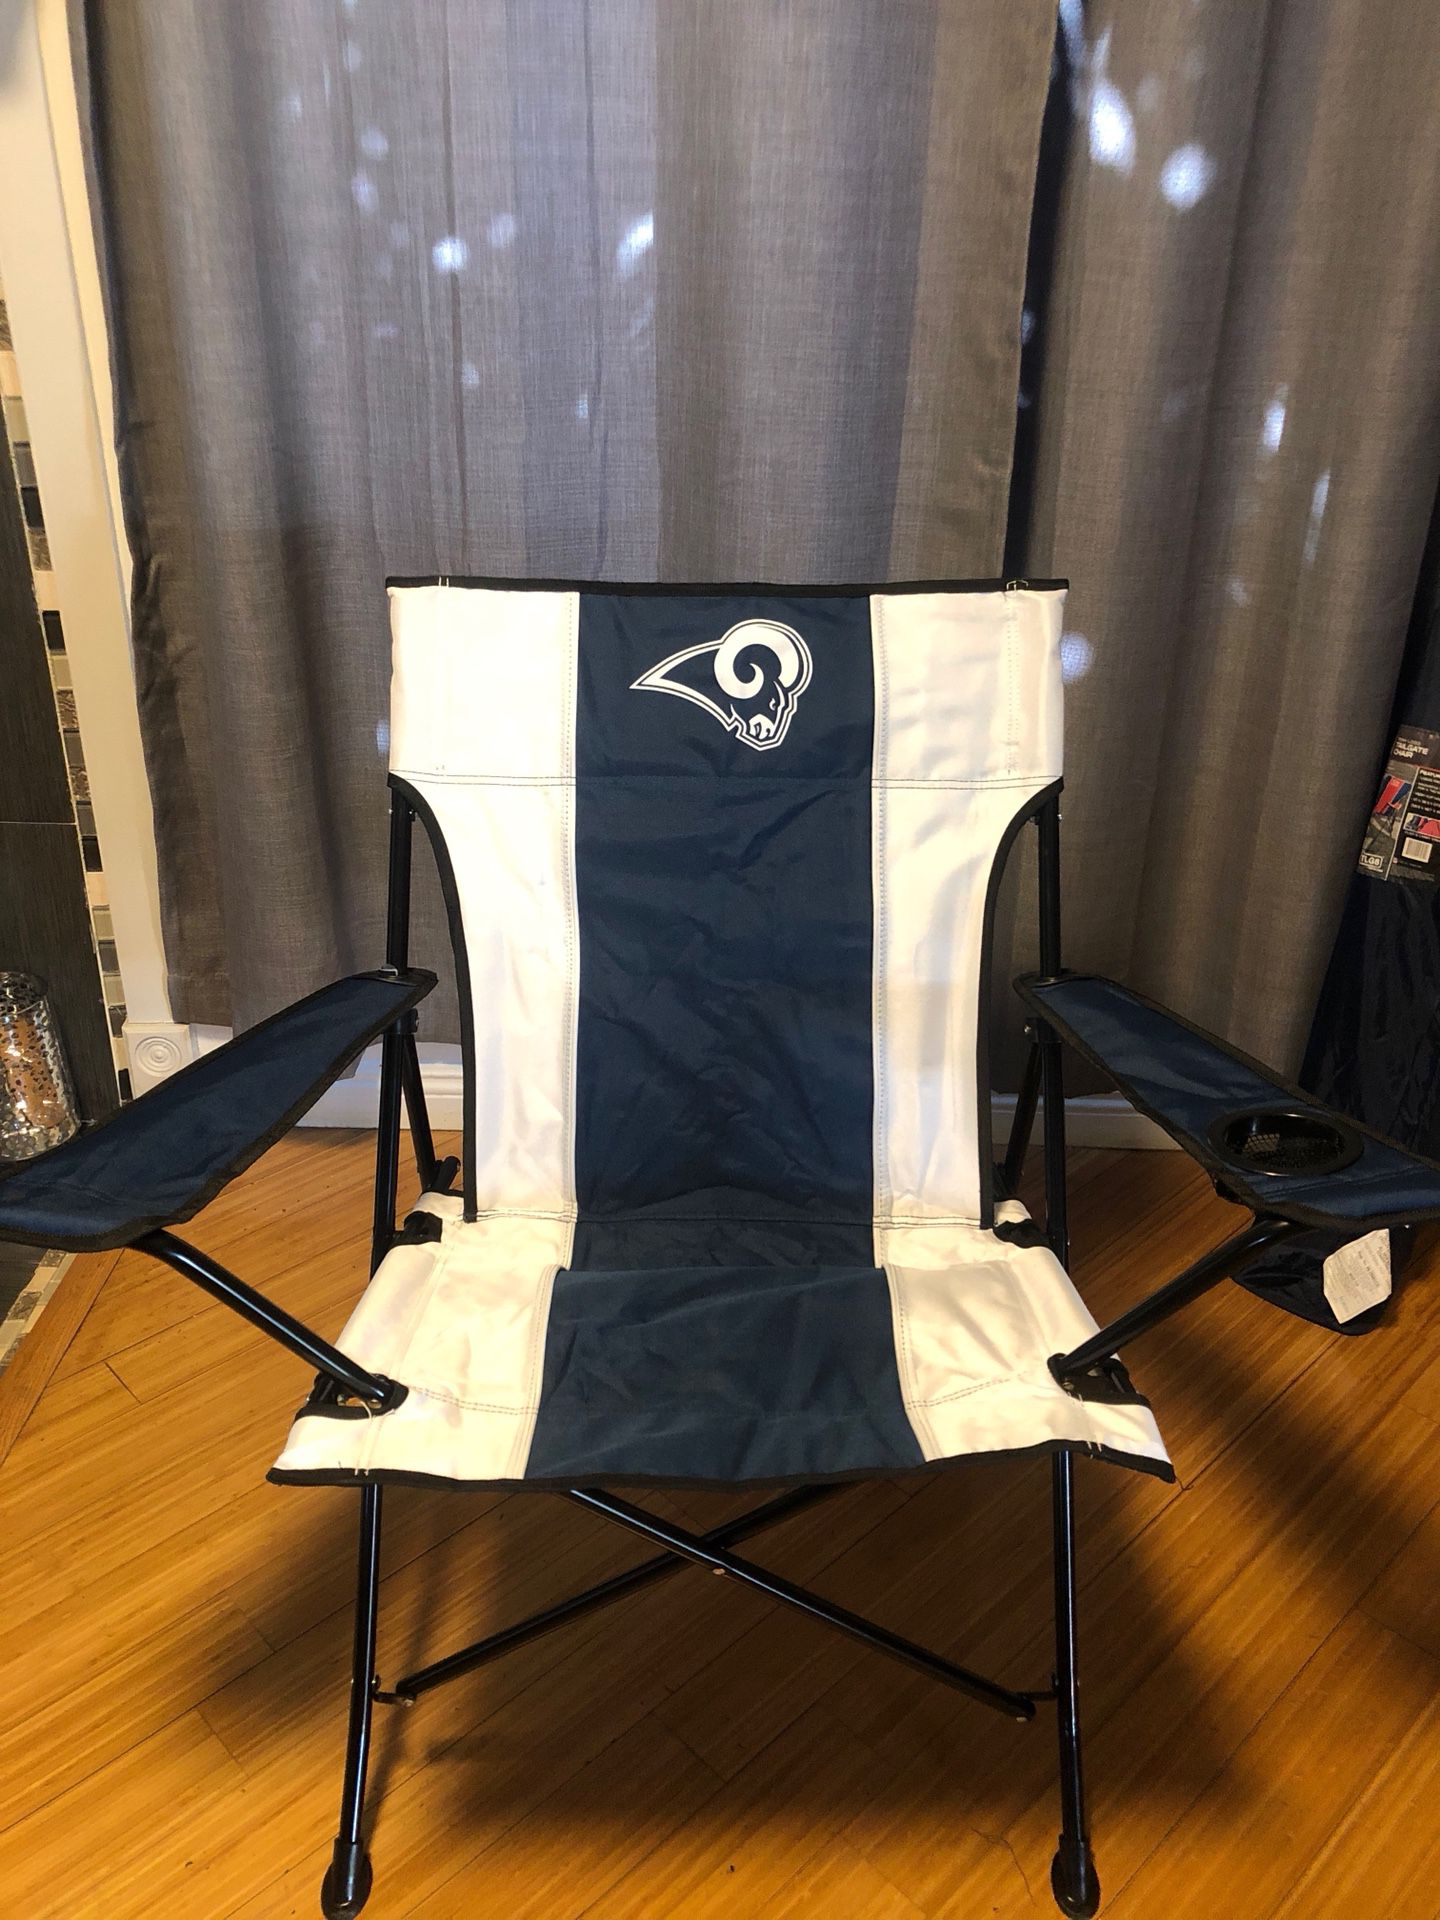 Rams chairs new